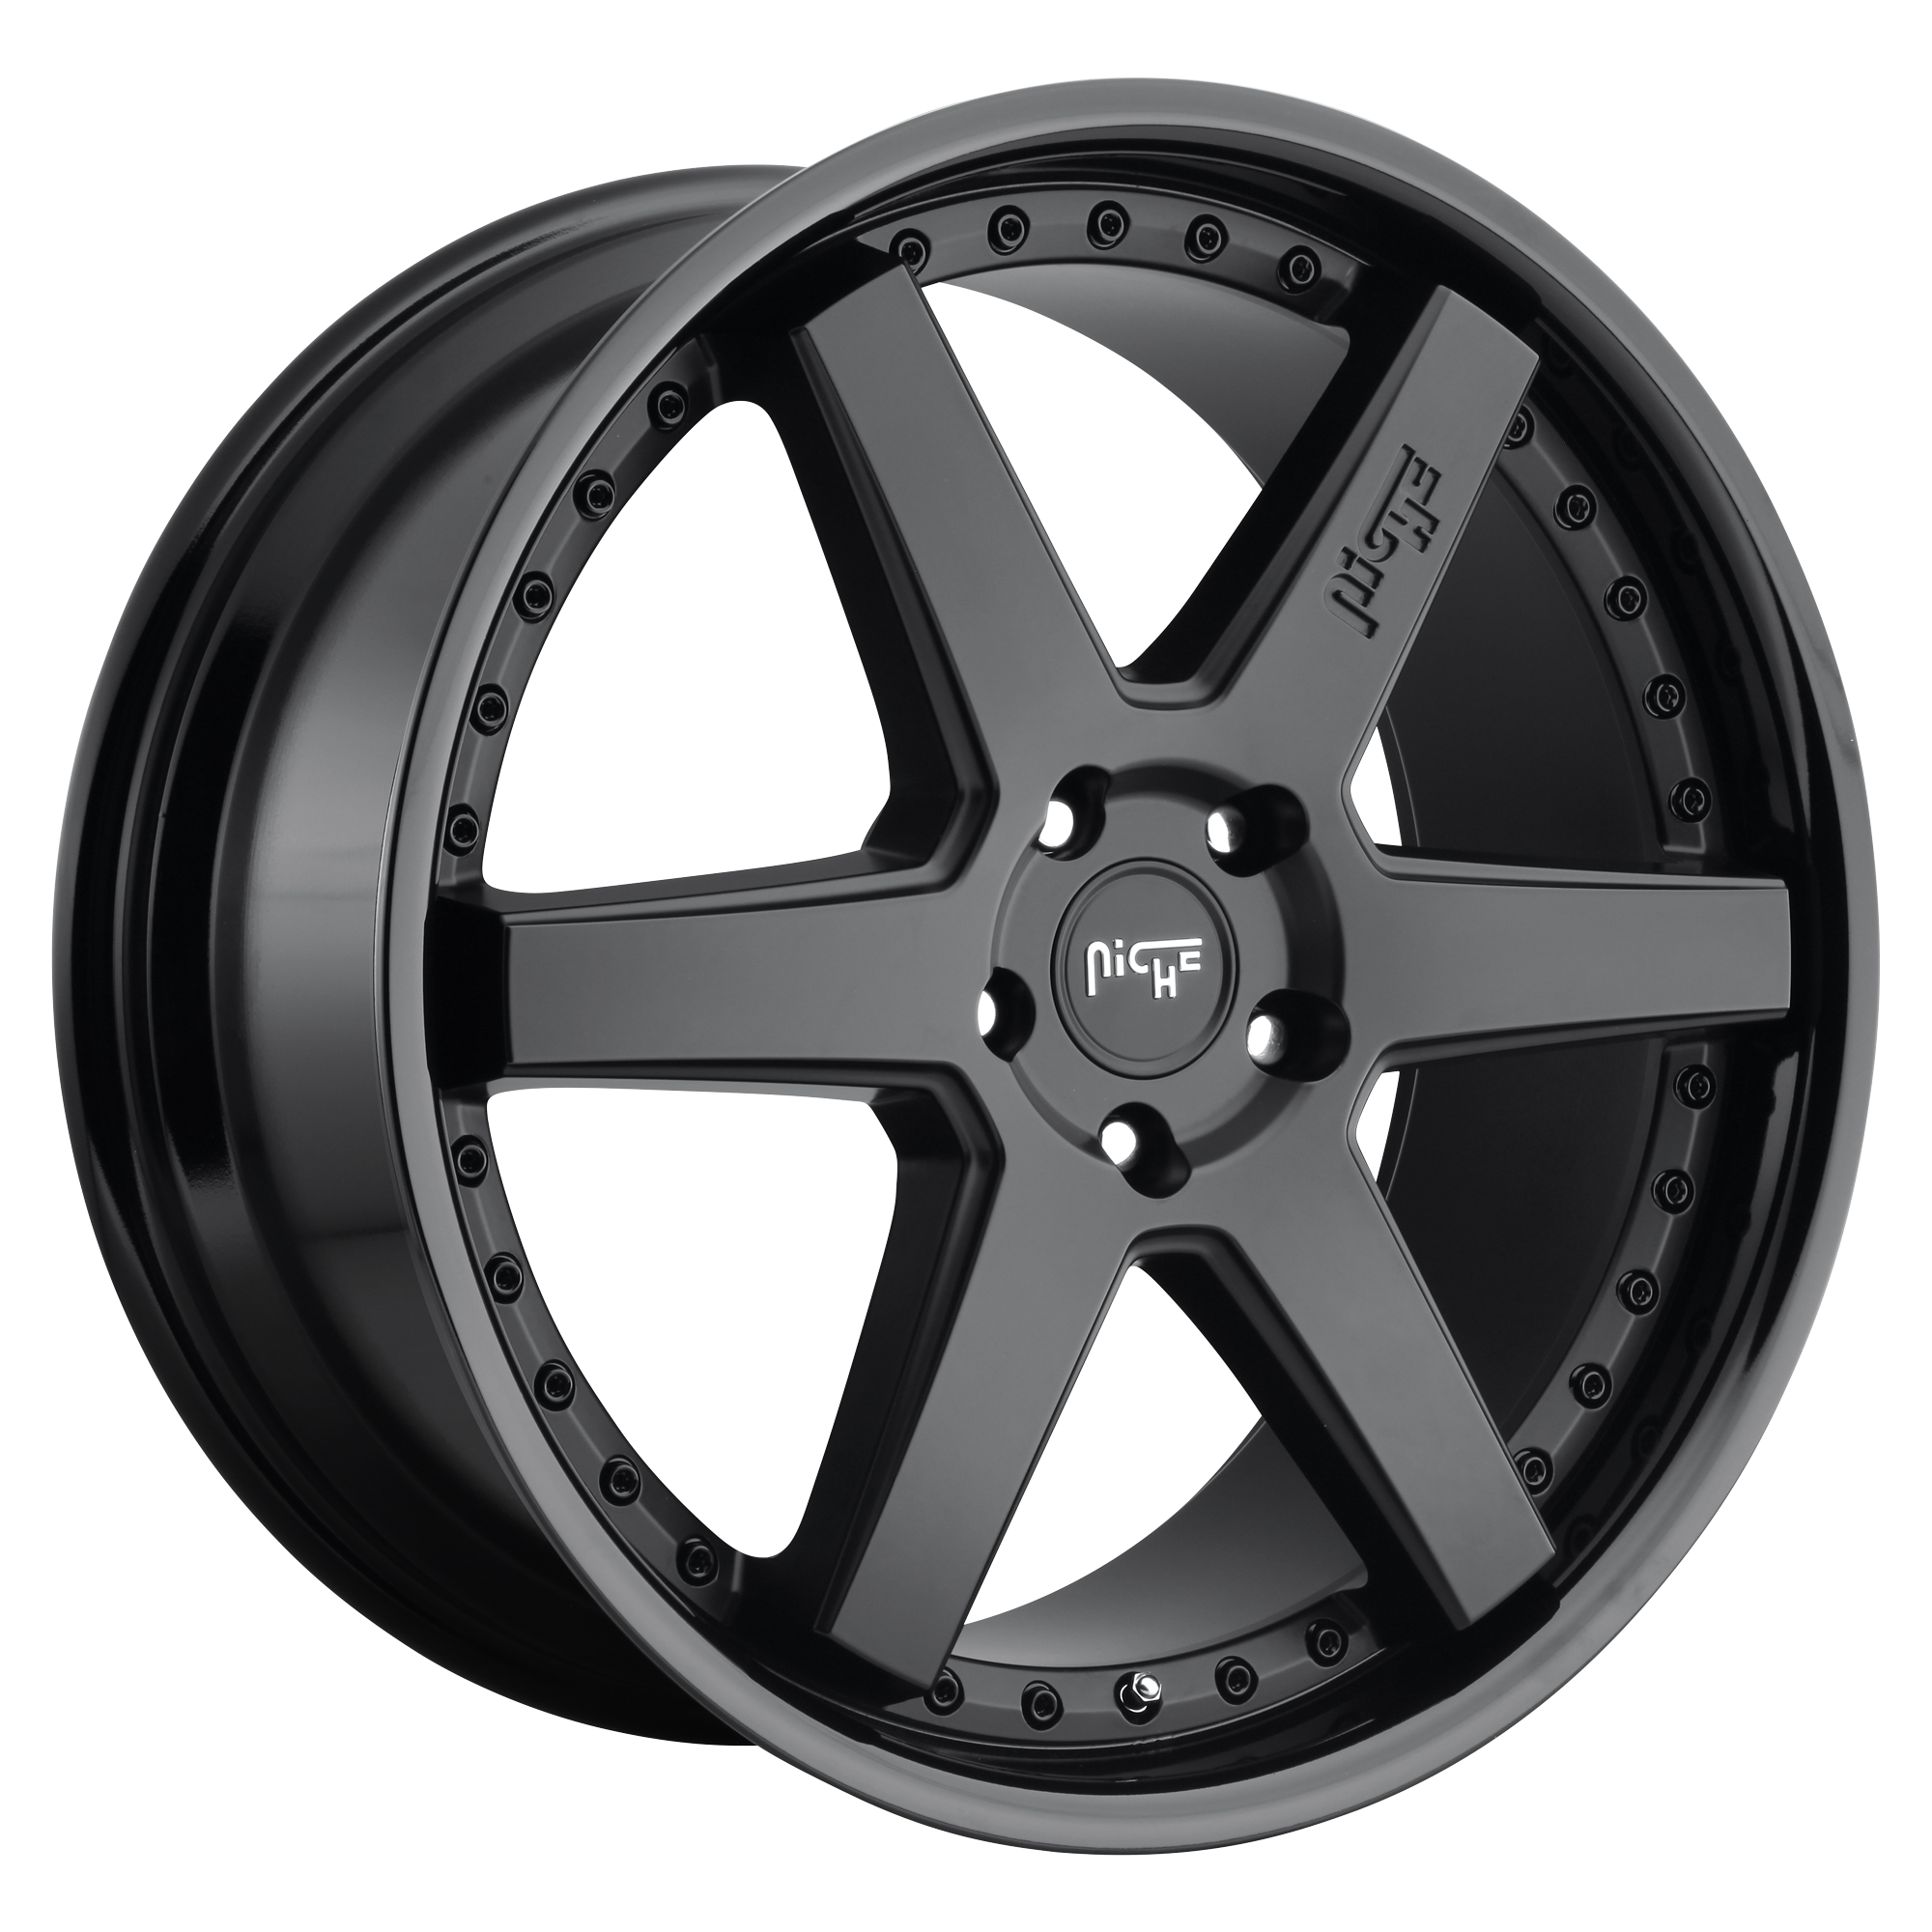 ALTAIR 18x9.5 5x120.00 GLOSS BLACK MATTE BLACK (35 mm) - Tires and Engine Performance